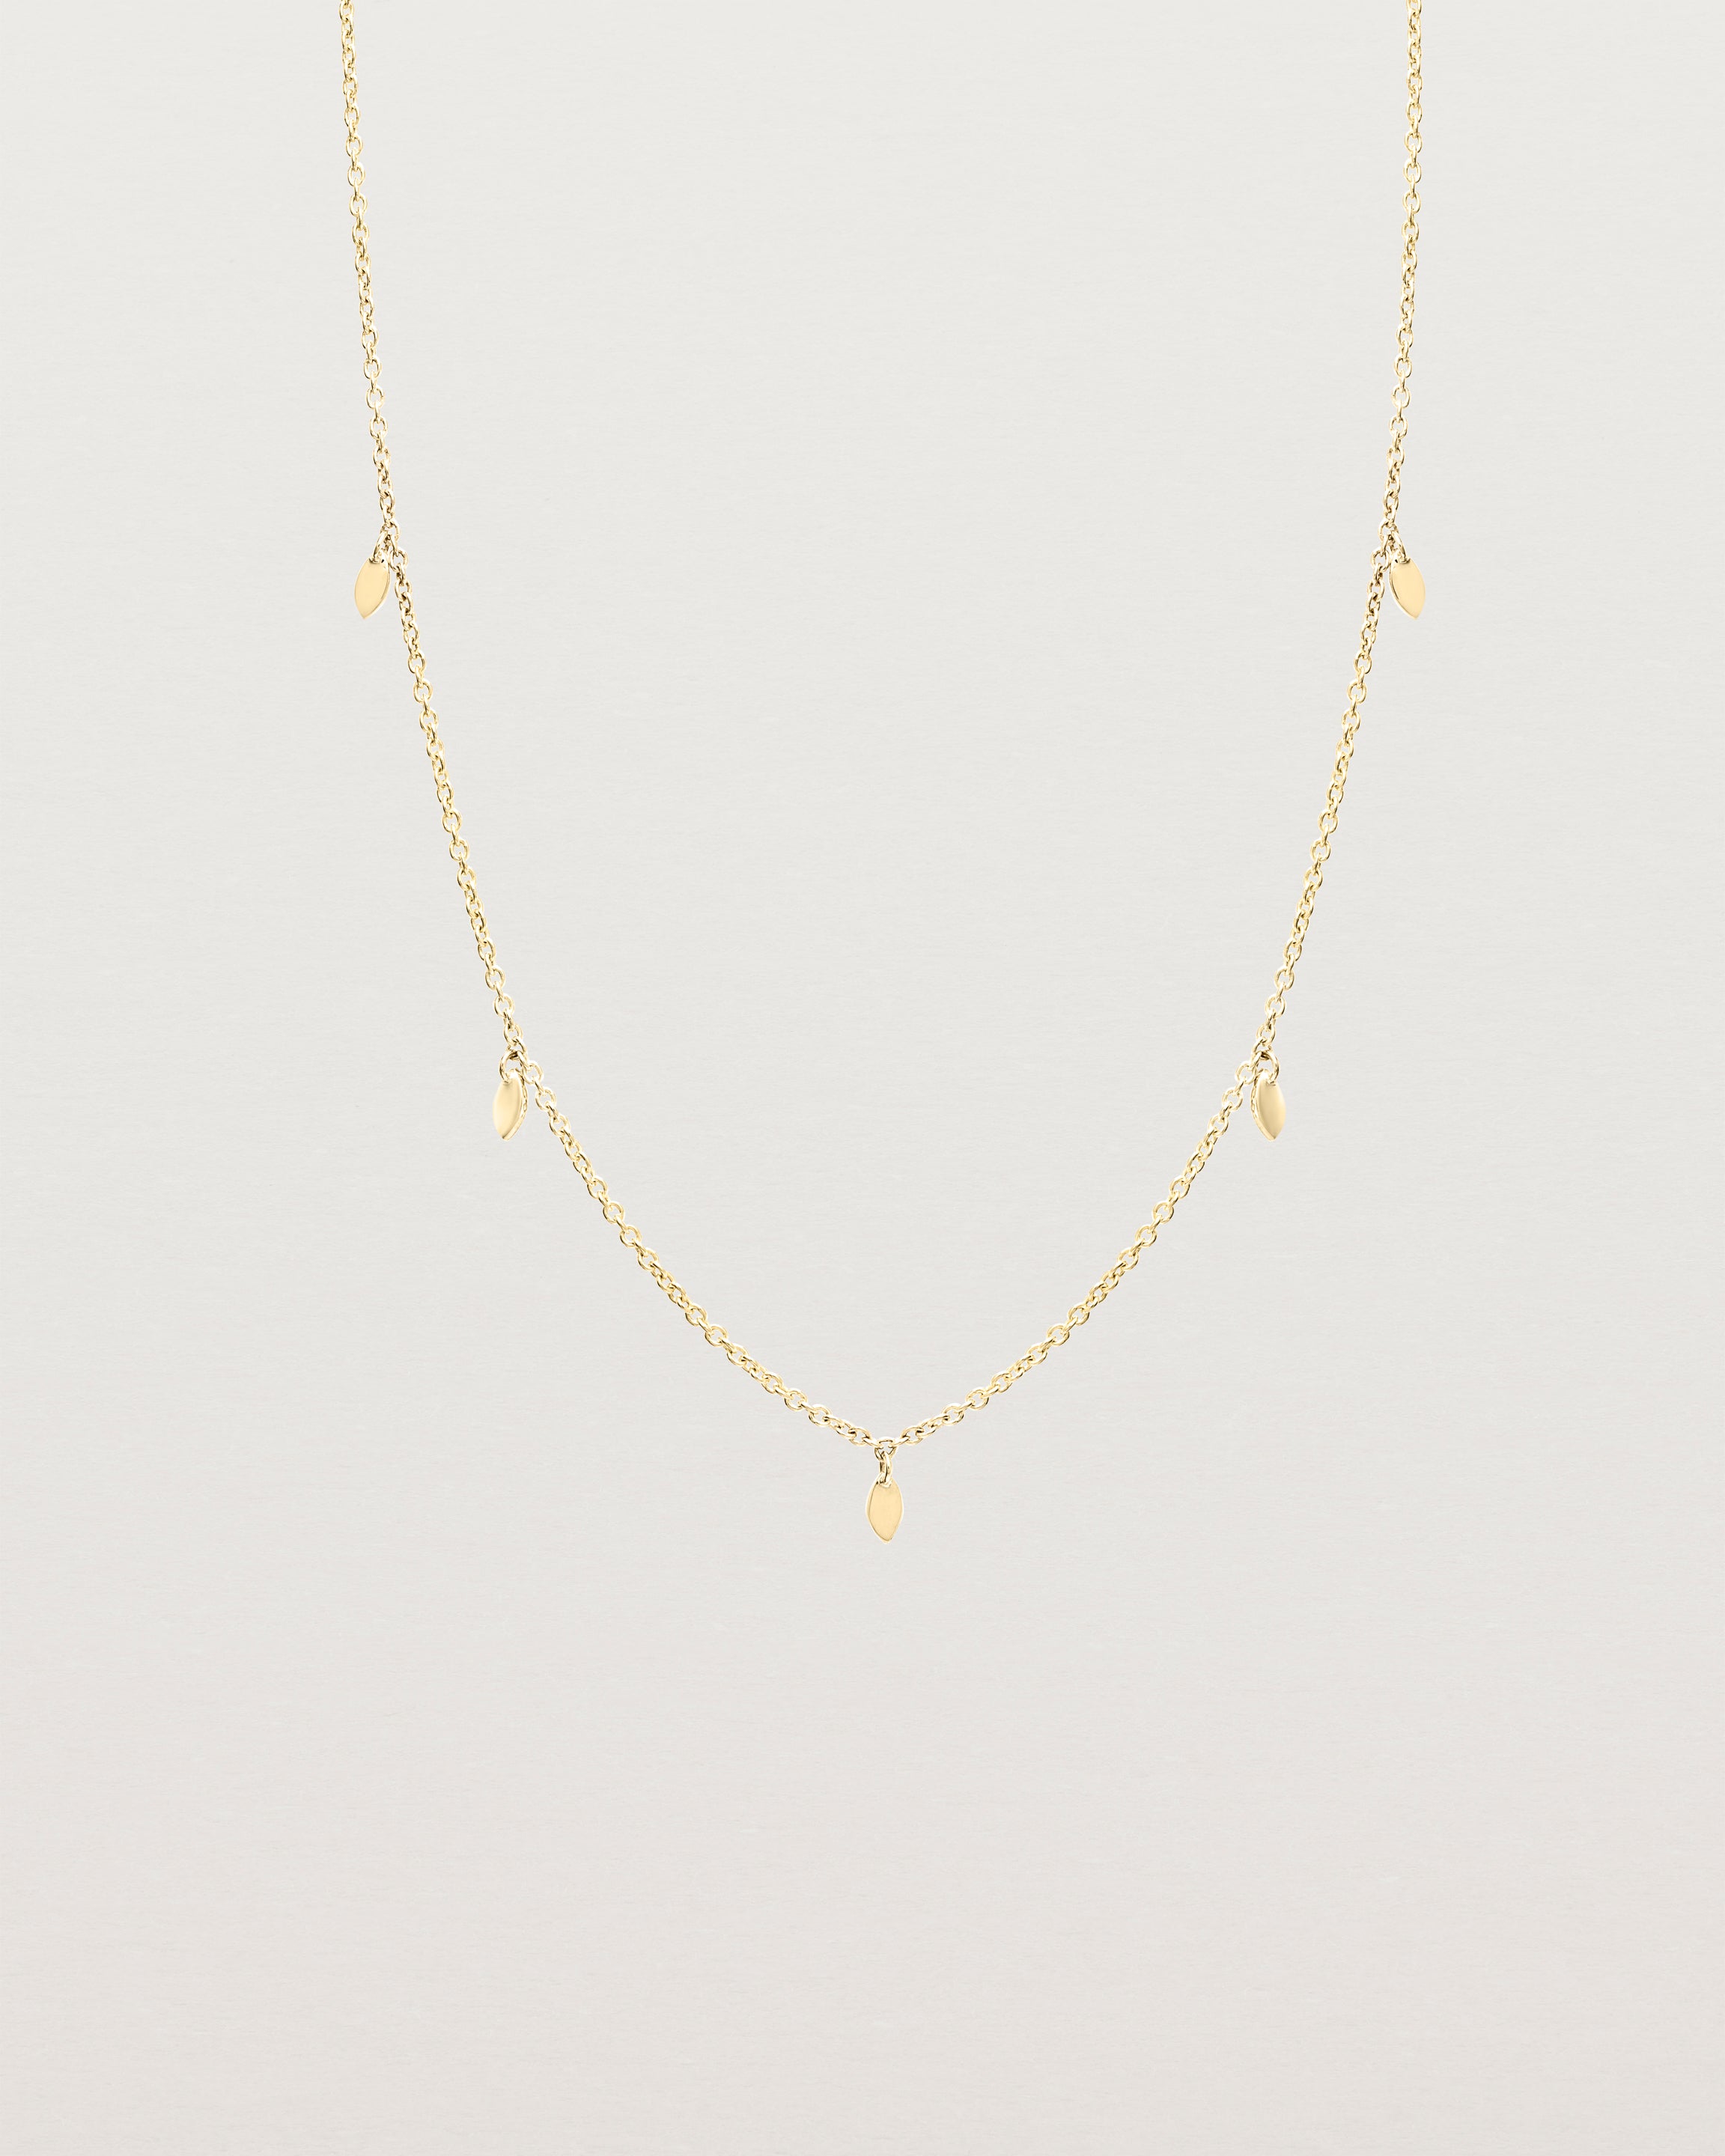 Front view of the Daisy Chain Necklace | Yellow Gold.